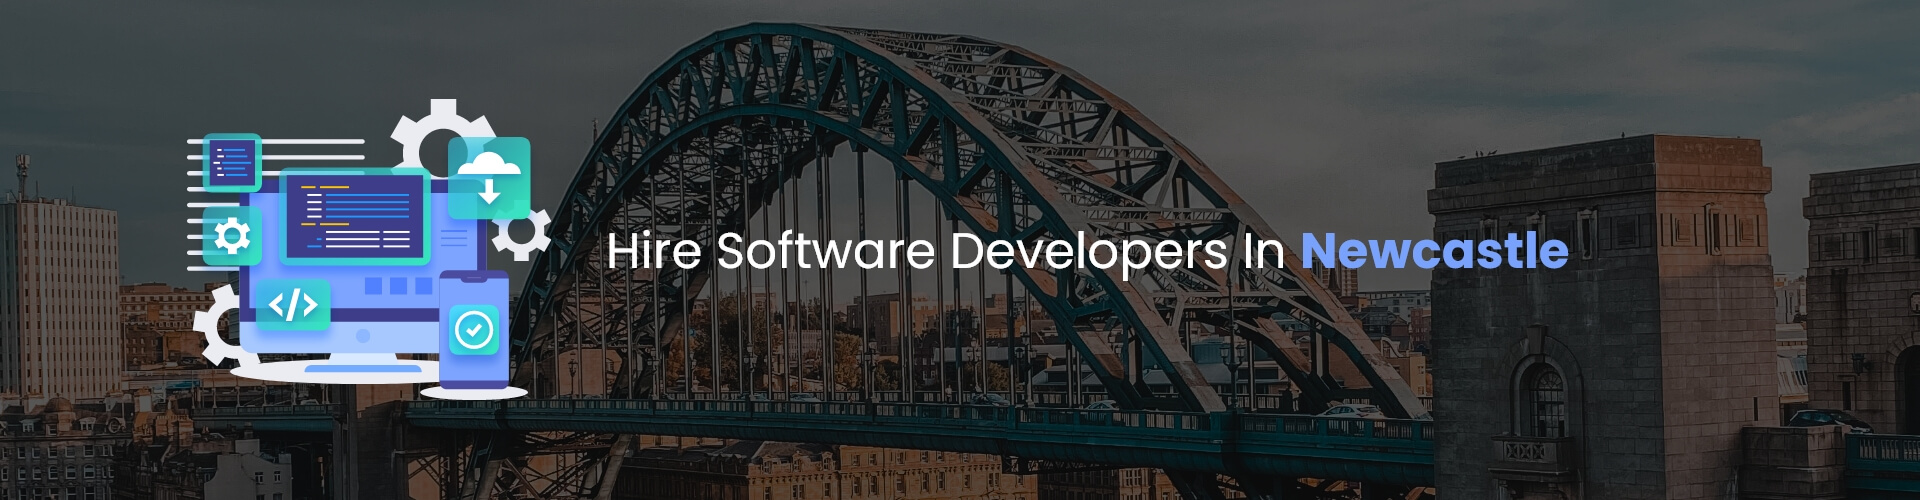 hire software developers in newcastle